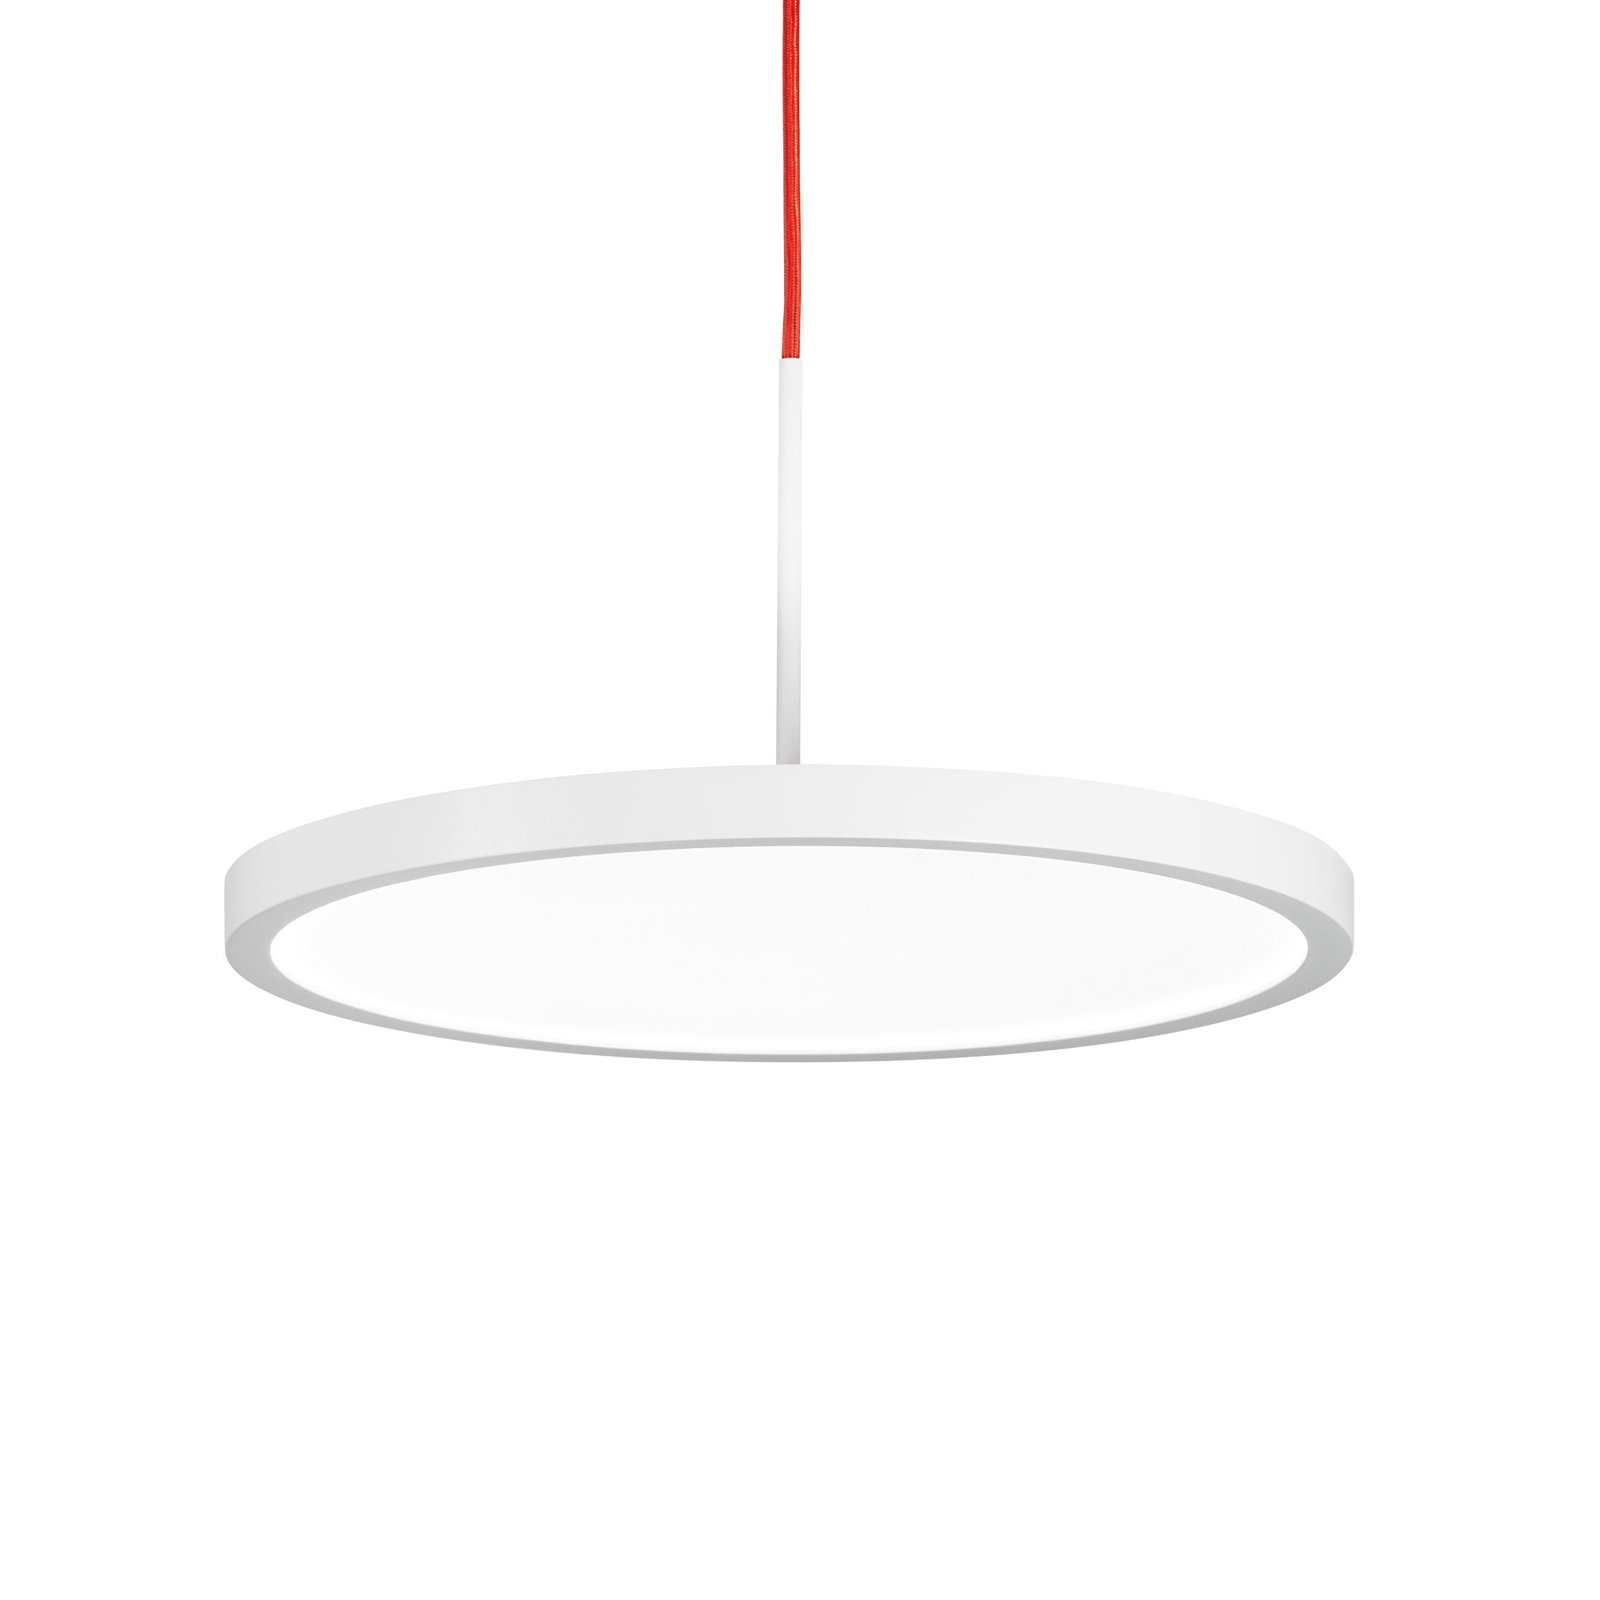 VIVAA 2.0 LED hanging lamp Ø45cm red cable 4,000 K